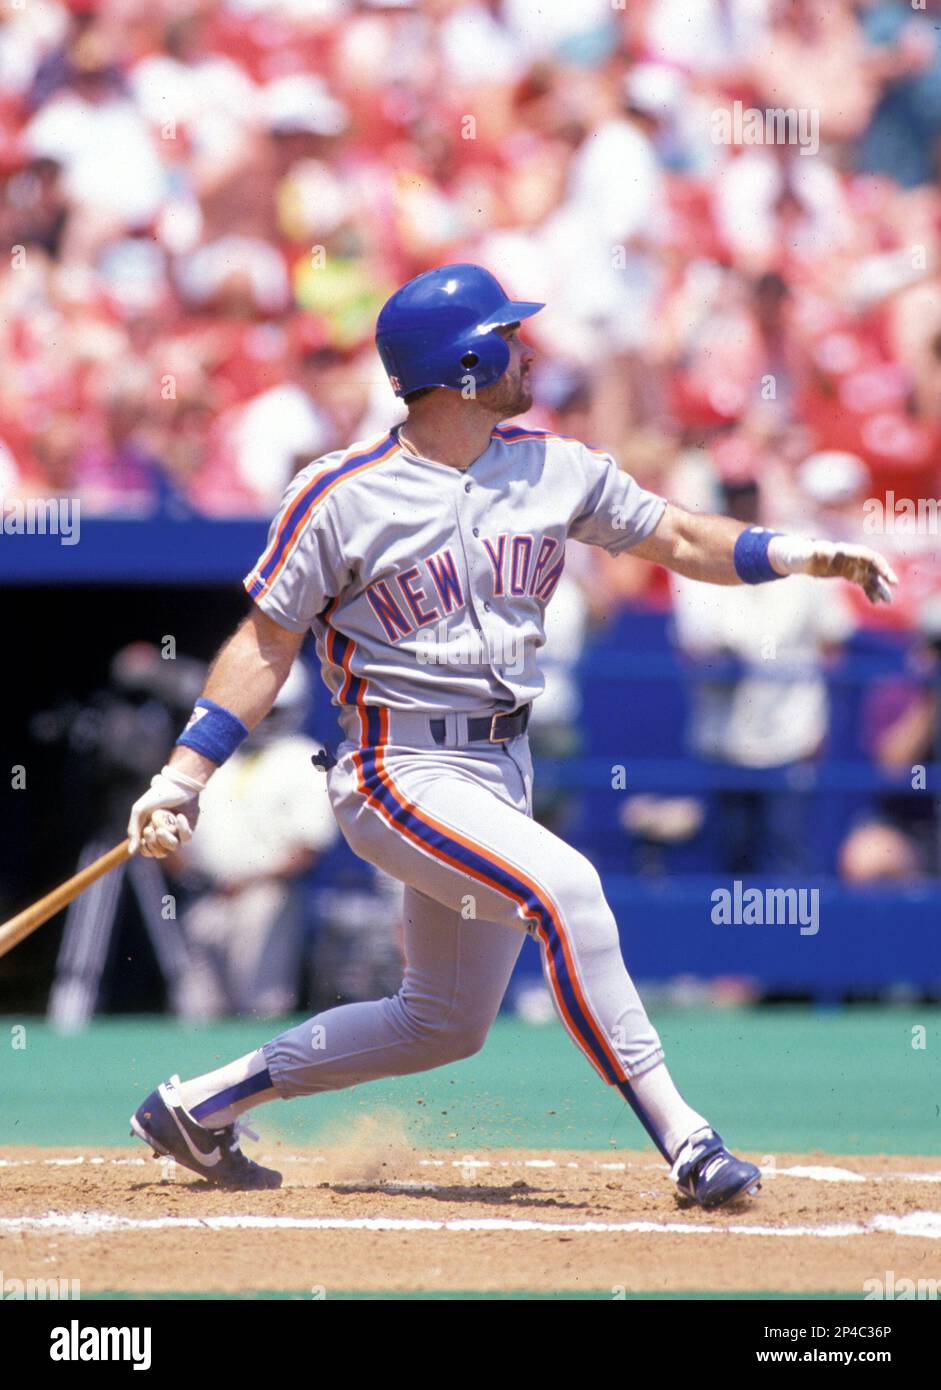 New York Mets Howard Johnson (20) in action during a game from his 1991  season with the New York Mets. Howard Johnson played for 14 years with 4  different teams.(AP Photo/David Durochik